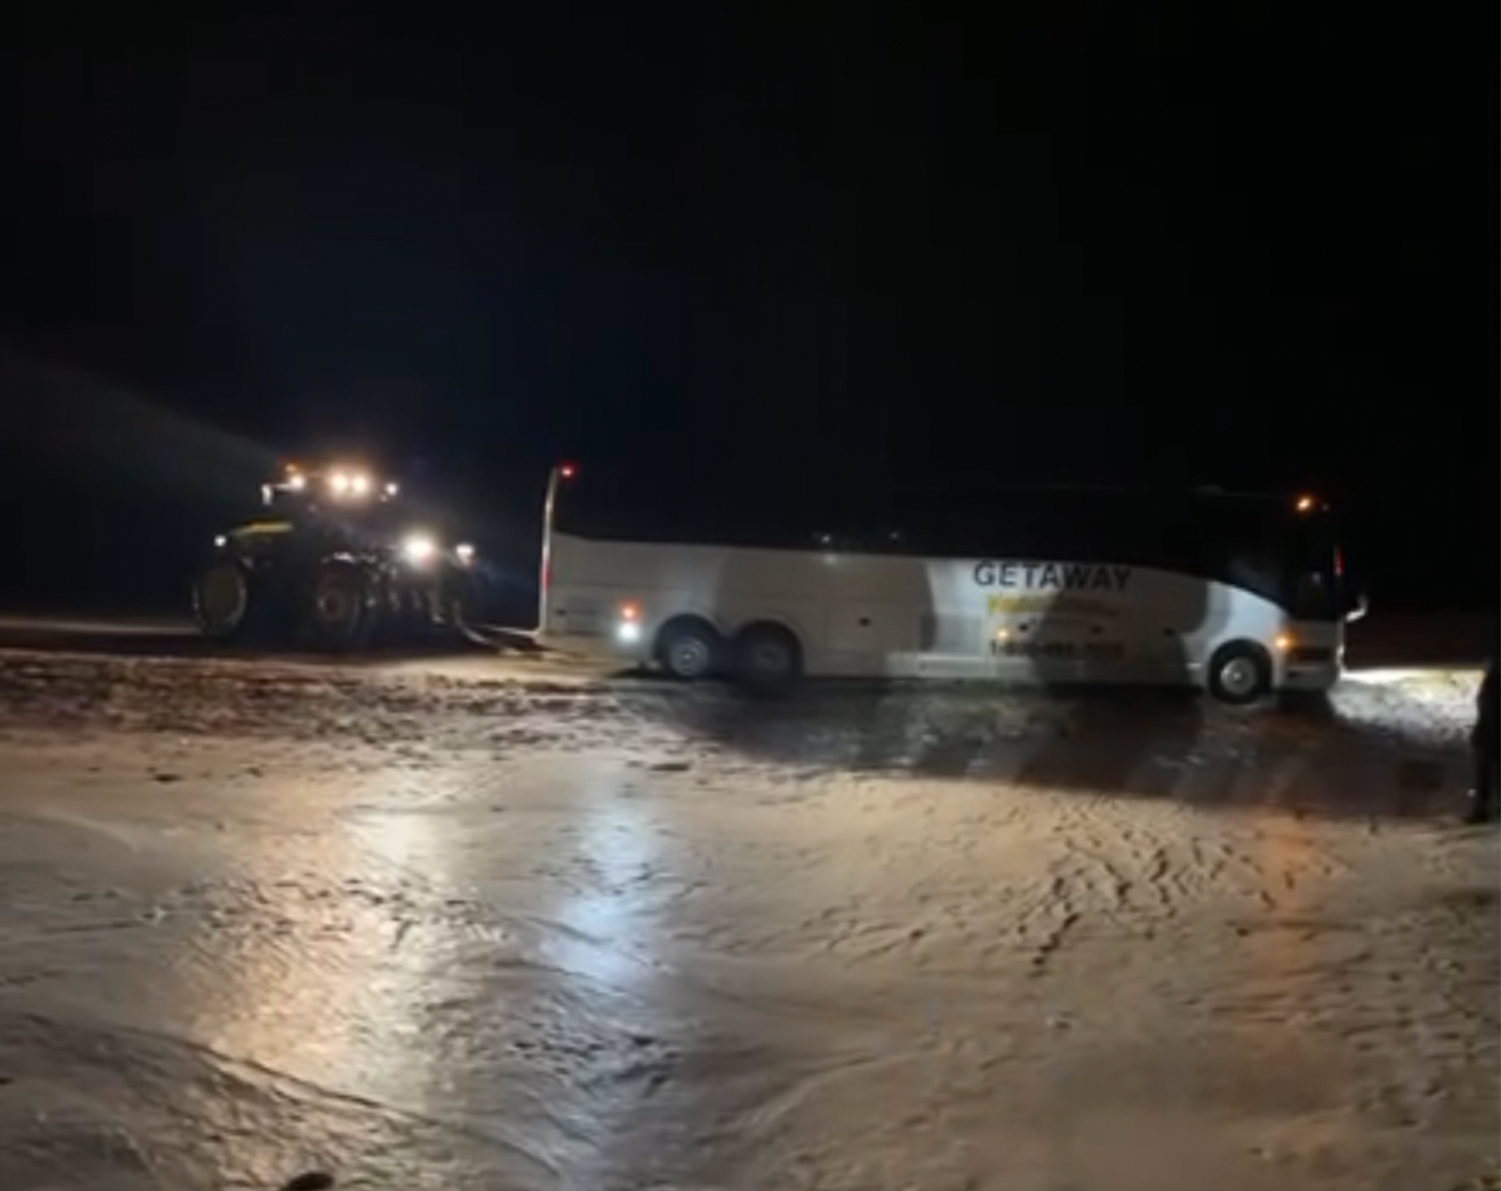 Tractor pulling bus out of snowbank on a dark road.